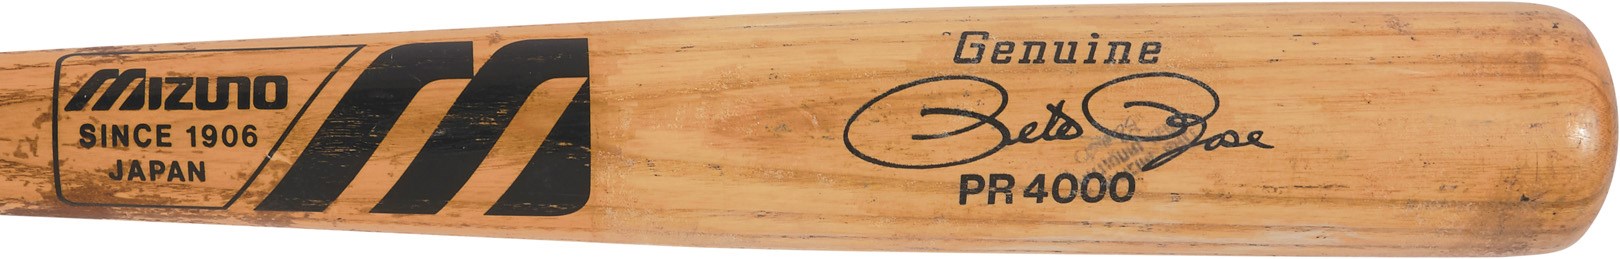 Pete Rose & Cincinnati Reds - 1984 Pete Rose Game Used Mizuno Bat from Lee Smith Collection (Lee Smith LOA)